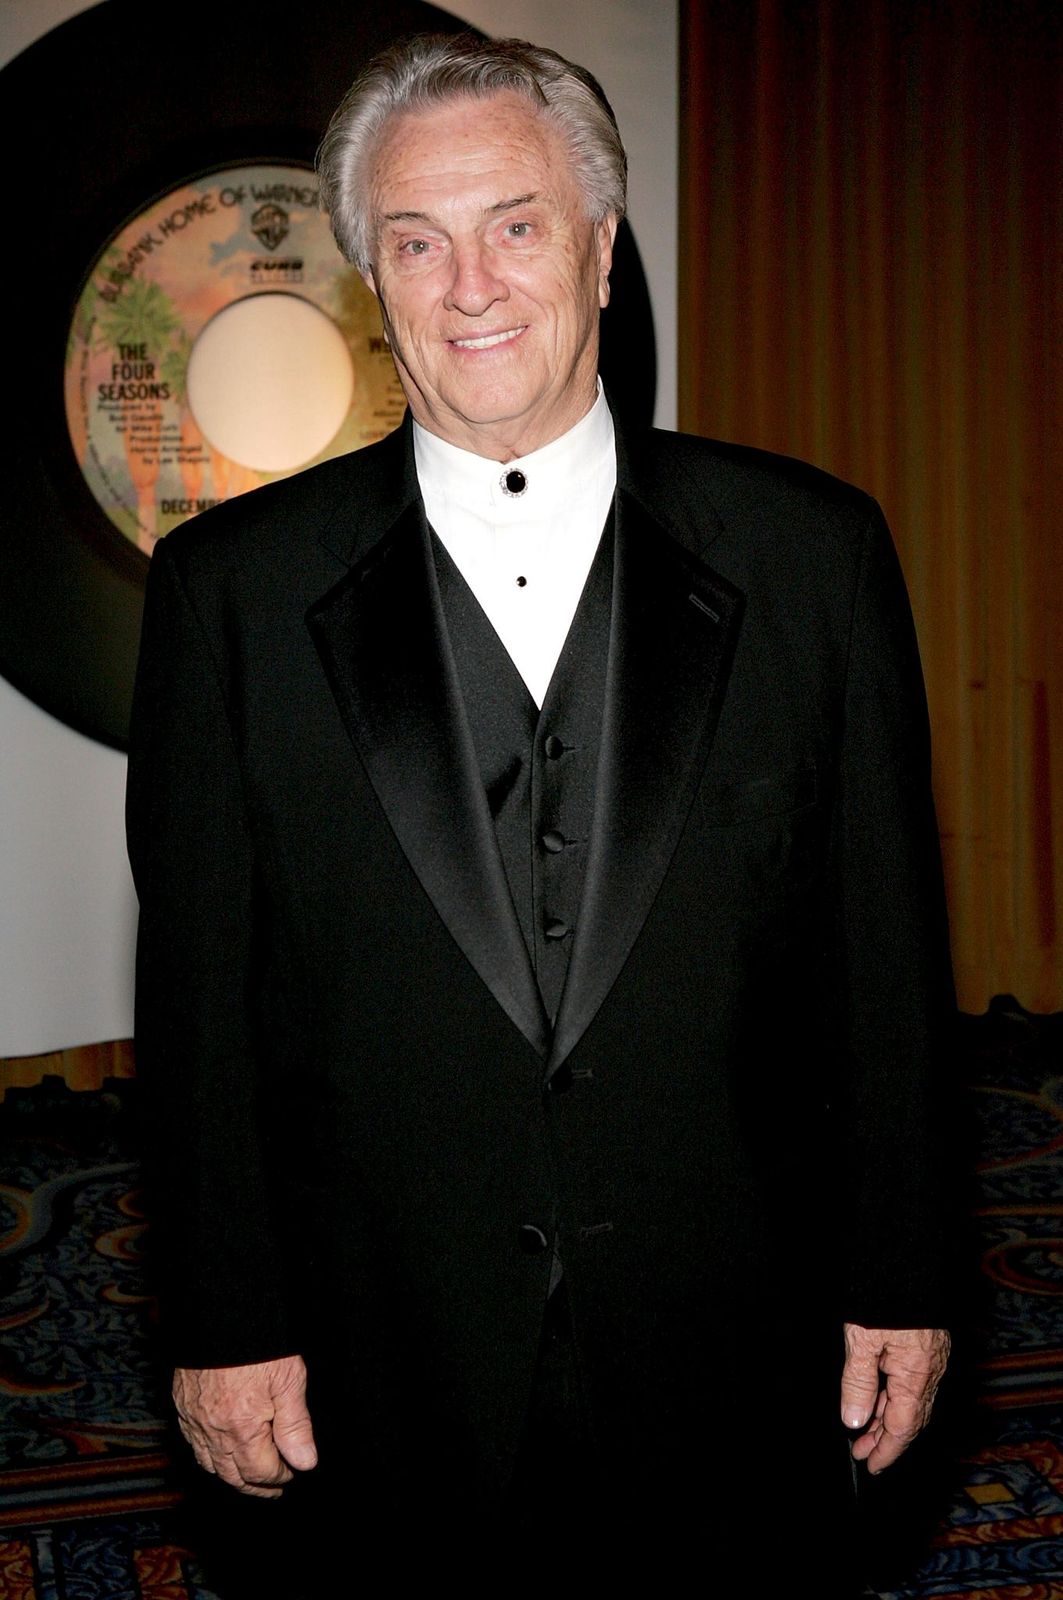 Tommy DeVito at the opening night of the "Jersey Boys" after-party at the Marriott Marquis on November 6, 2005, in New York City | Photo" Paul Hawthorne/Getty Images